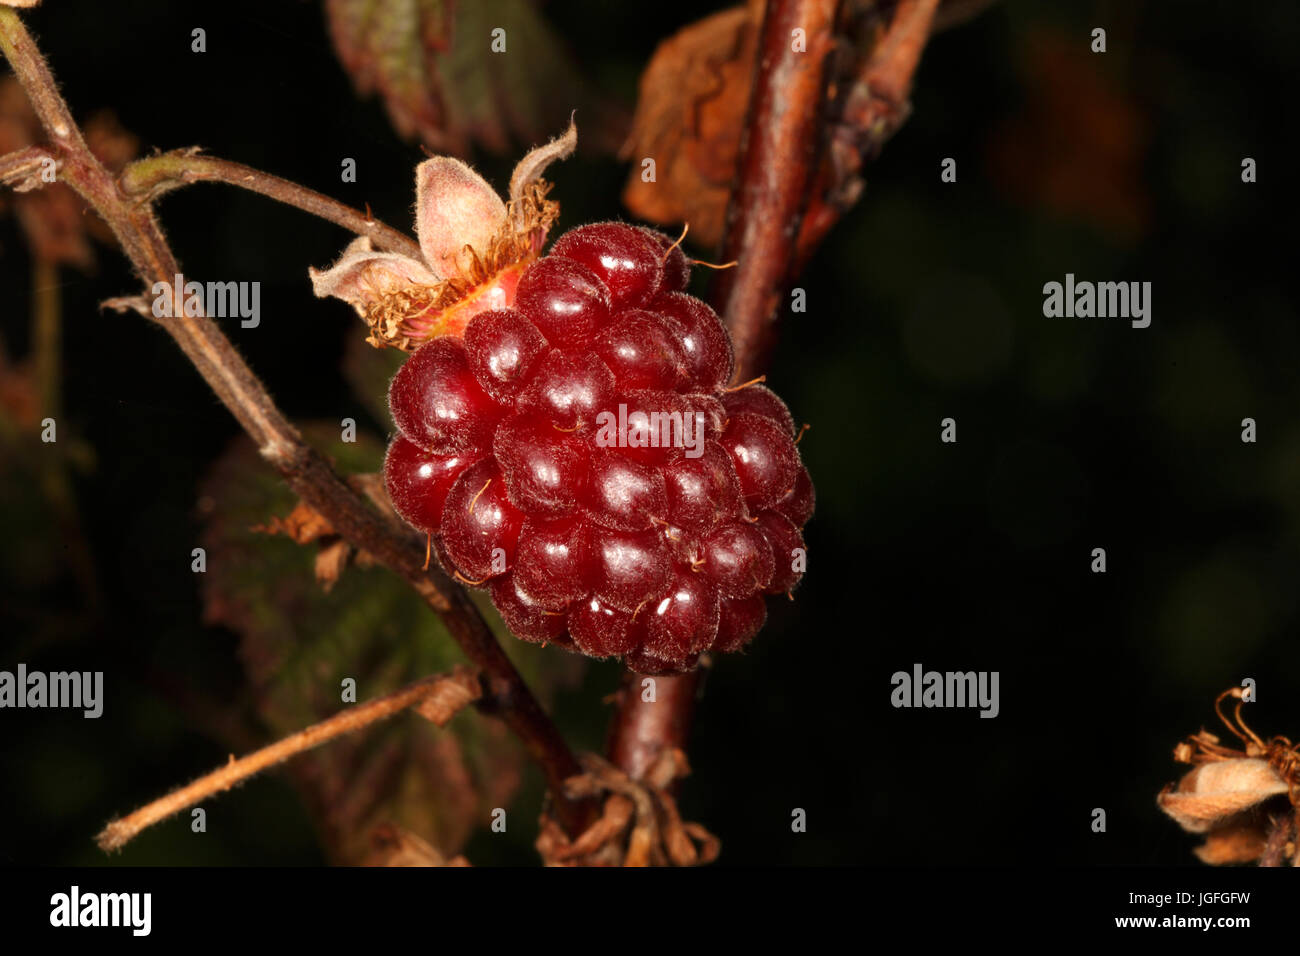 Rubus variety called Tummelberry. Hybrid soft fruit fruiting on last years stems or runners. Stock Photo